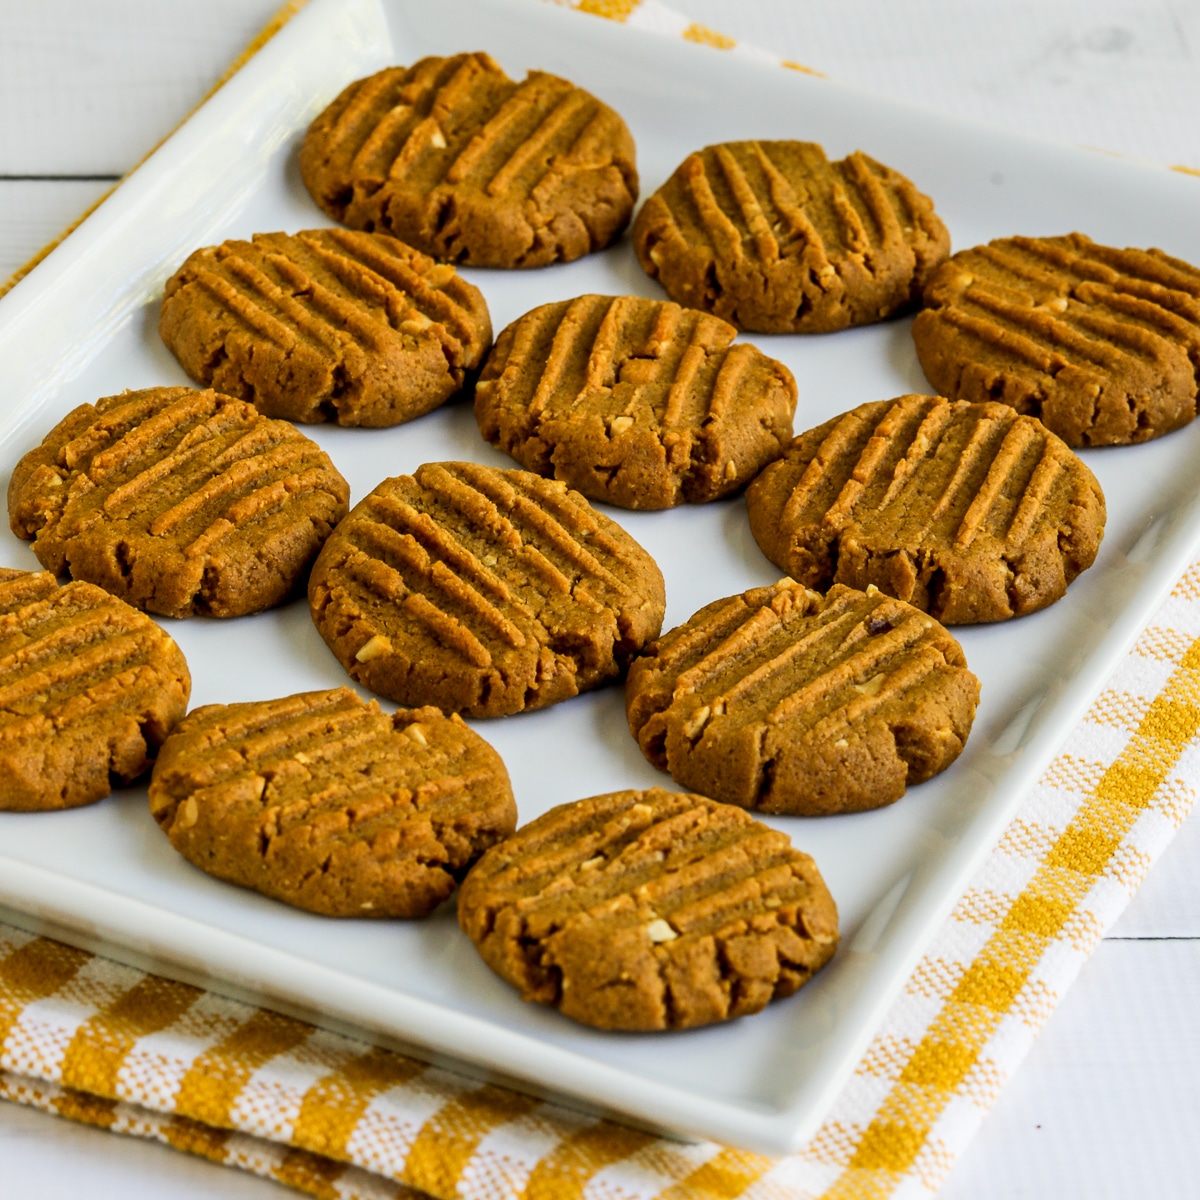 Sugar-Free Peanut Butter Cookies on serving plate on checked napkin.